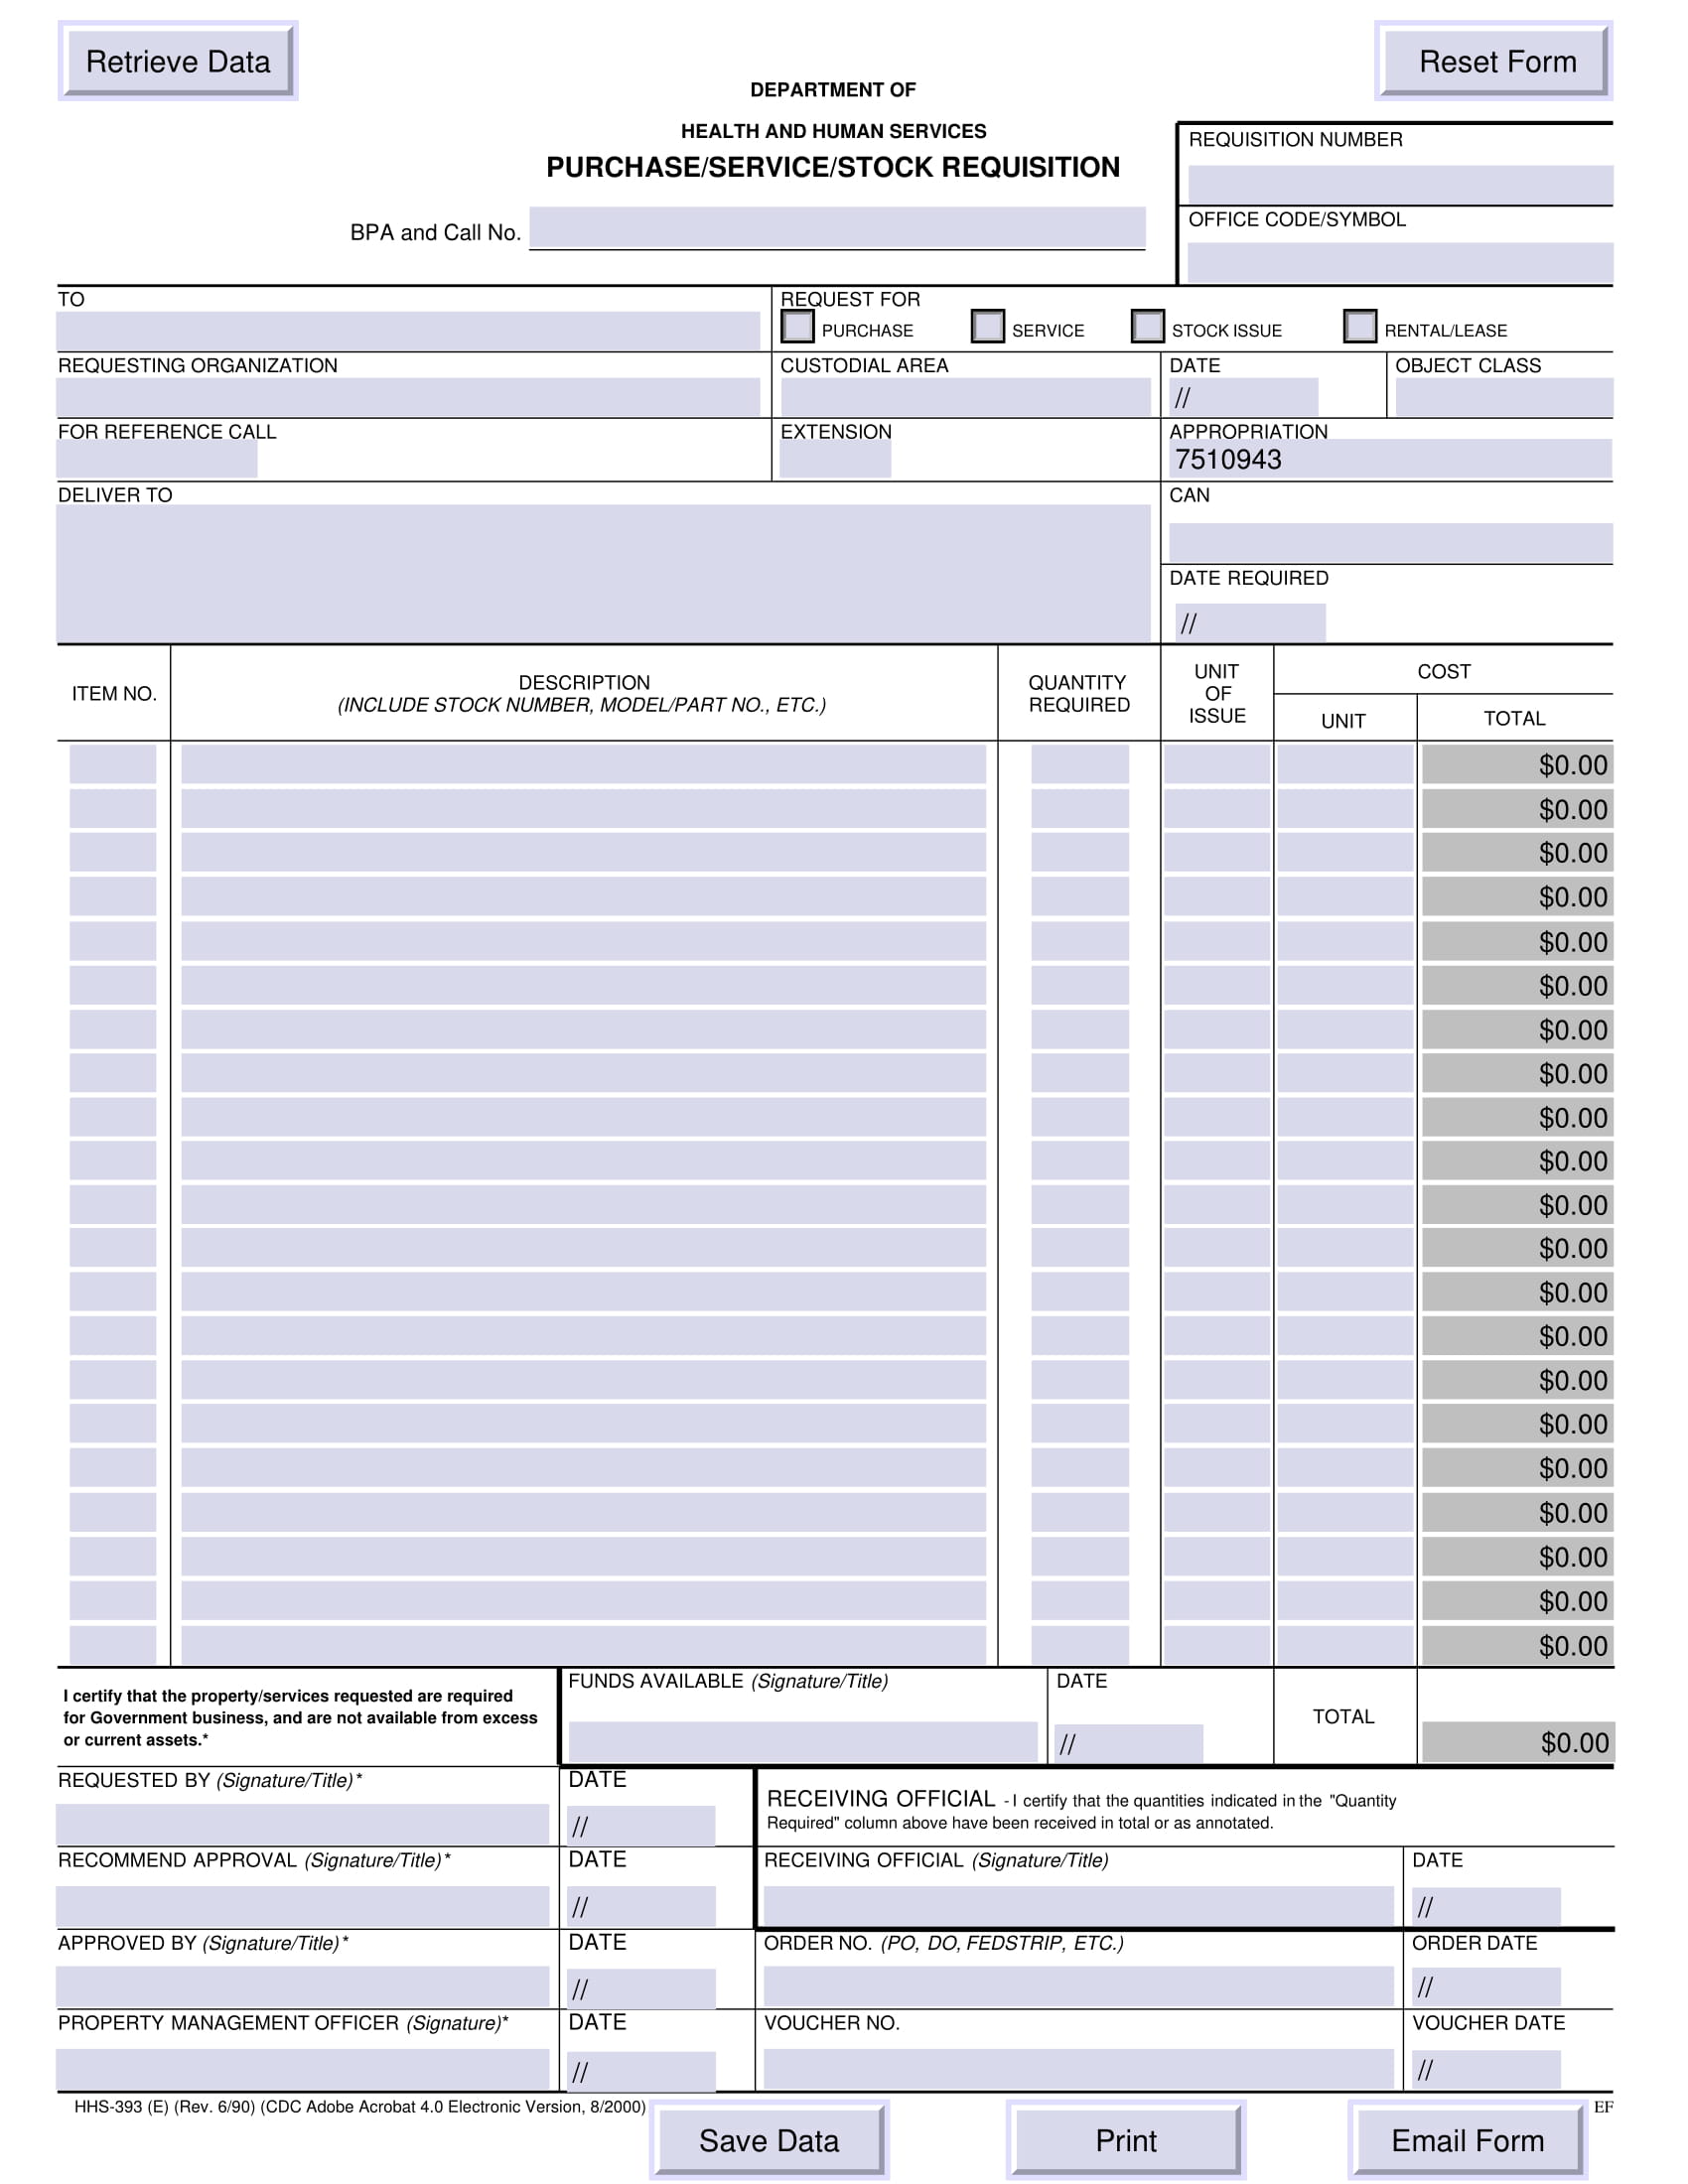 purchase or stock requisition form 1